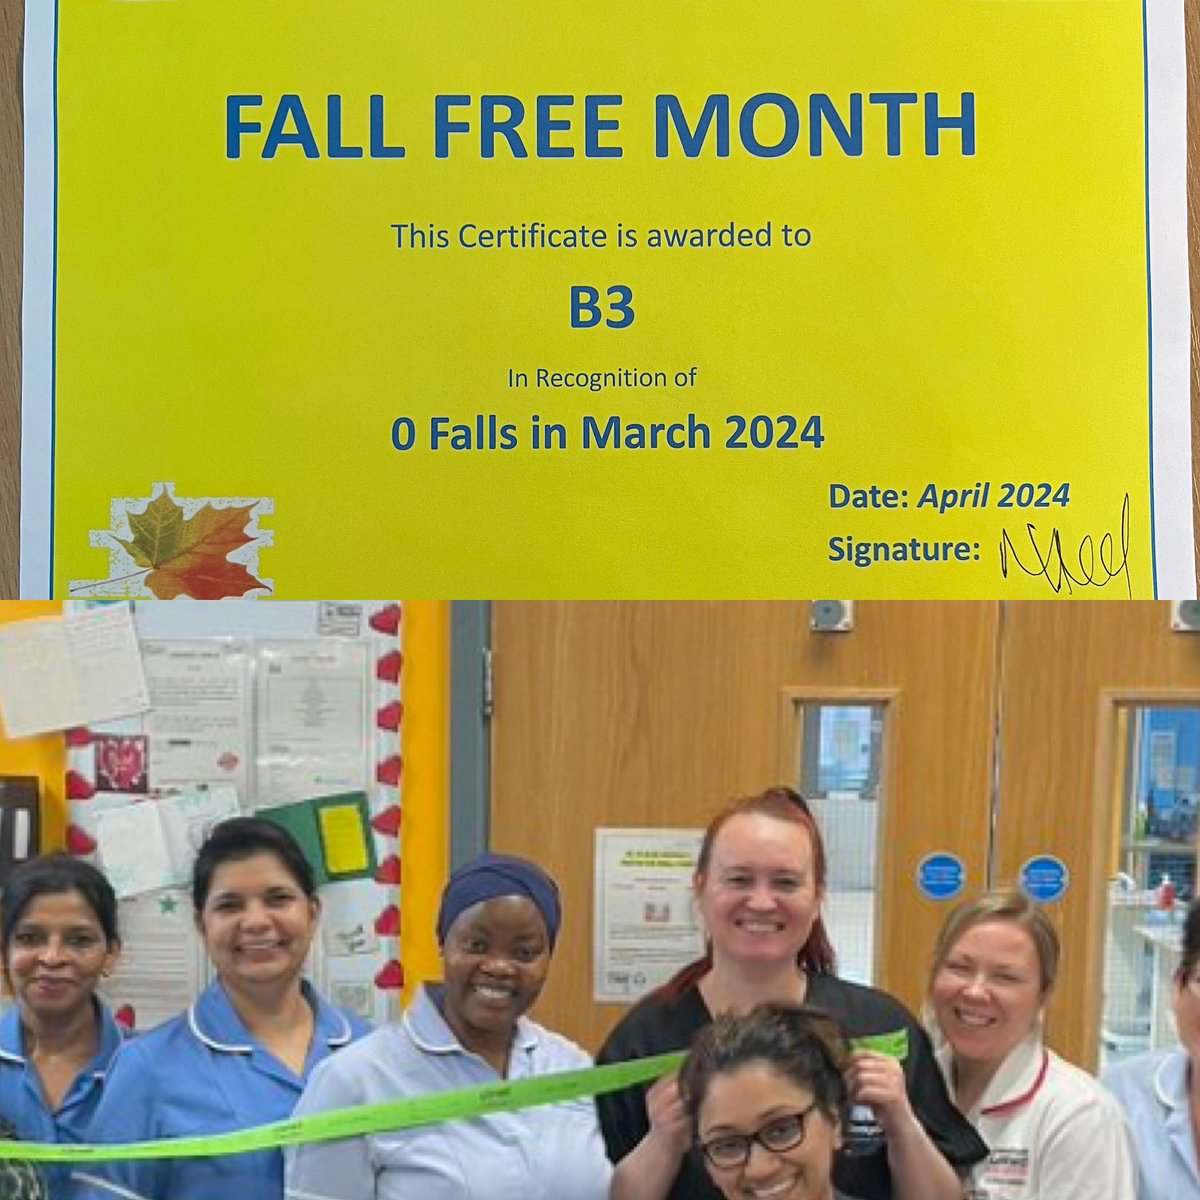 Time to celebrate 0 falls in March @StockportNHS well done B3, @helshow1 @NicolaFirth6 @AoifeIsherwood @StockportPtExp @lee_woolfe @MarisaLoganWar1 @falls_network @nhsdavies @Pollybegum3 @iainArogers @ChrisOL05142560 @SueACarroll 🍁🍁🍁🍁